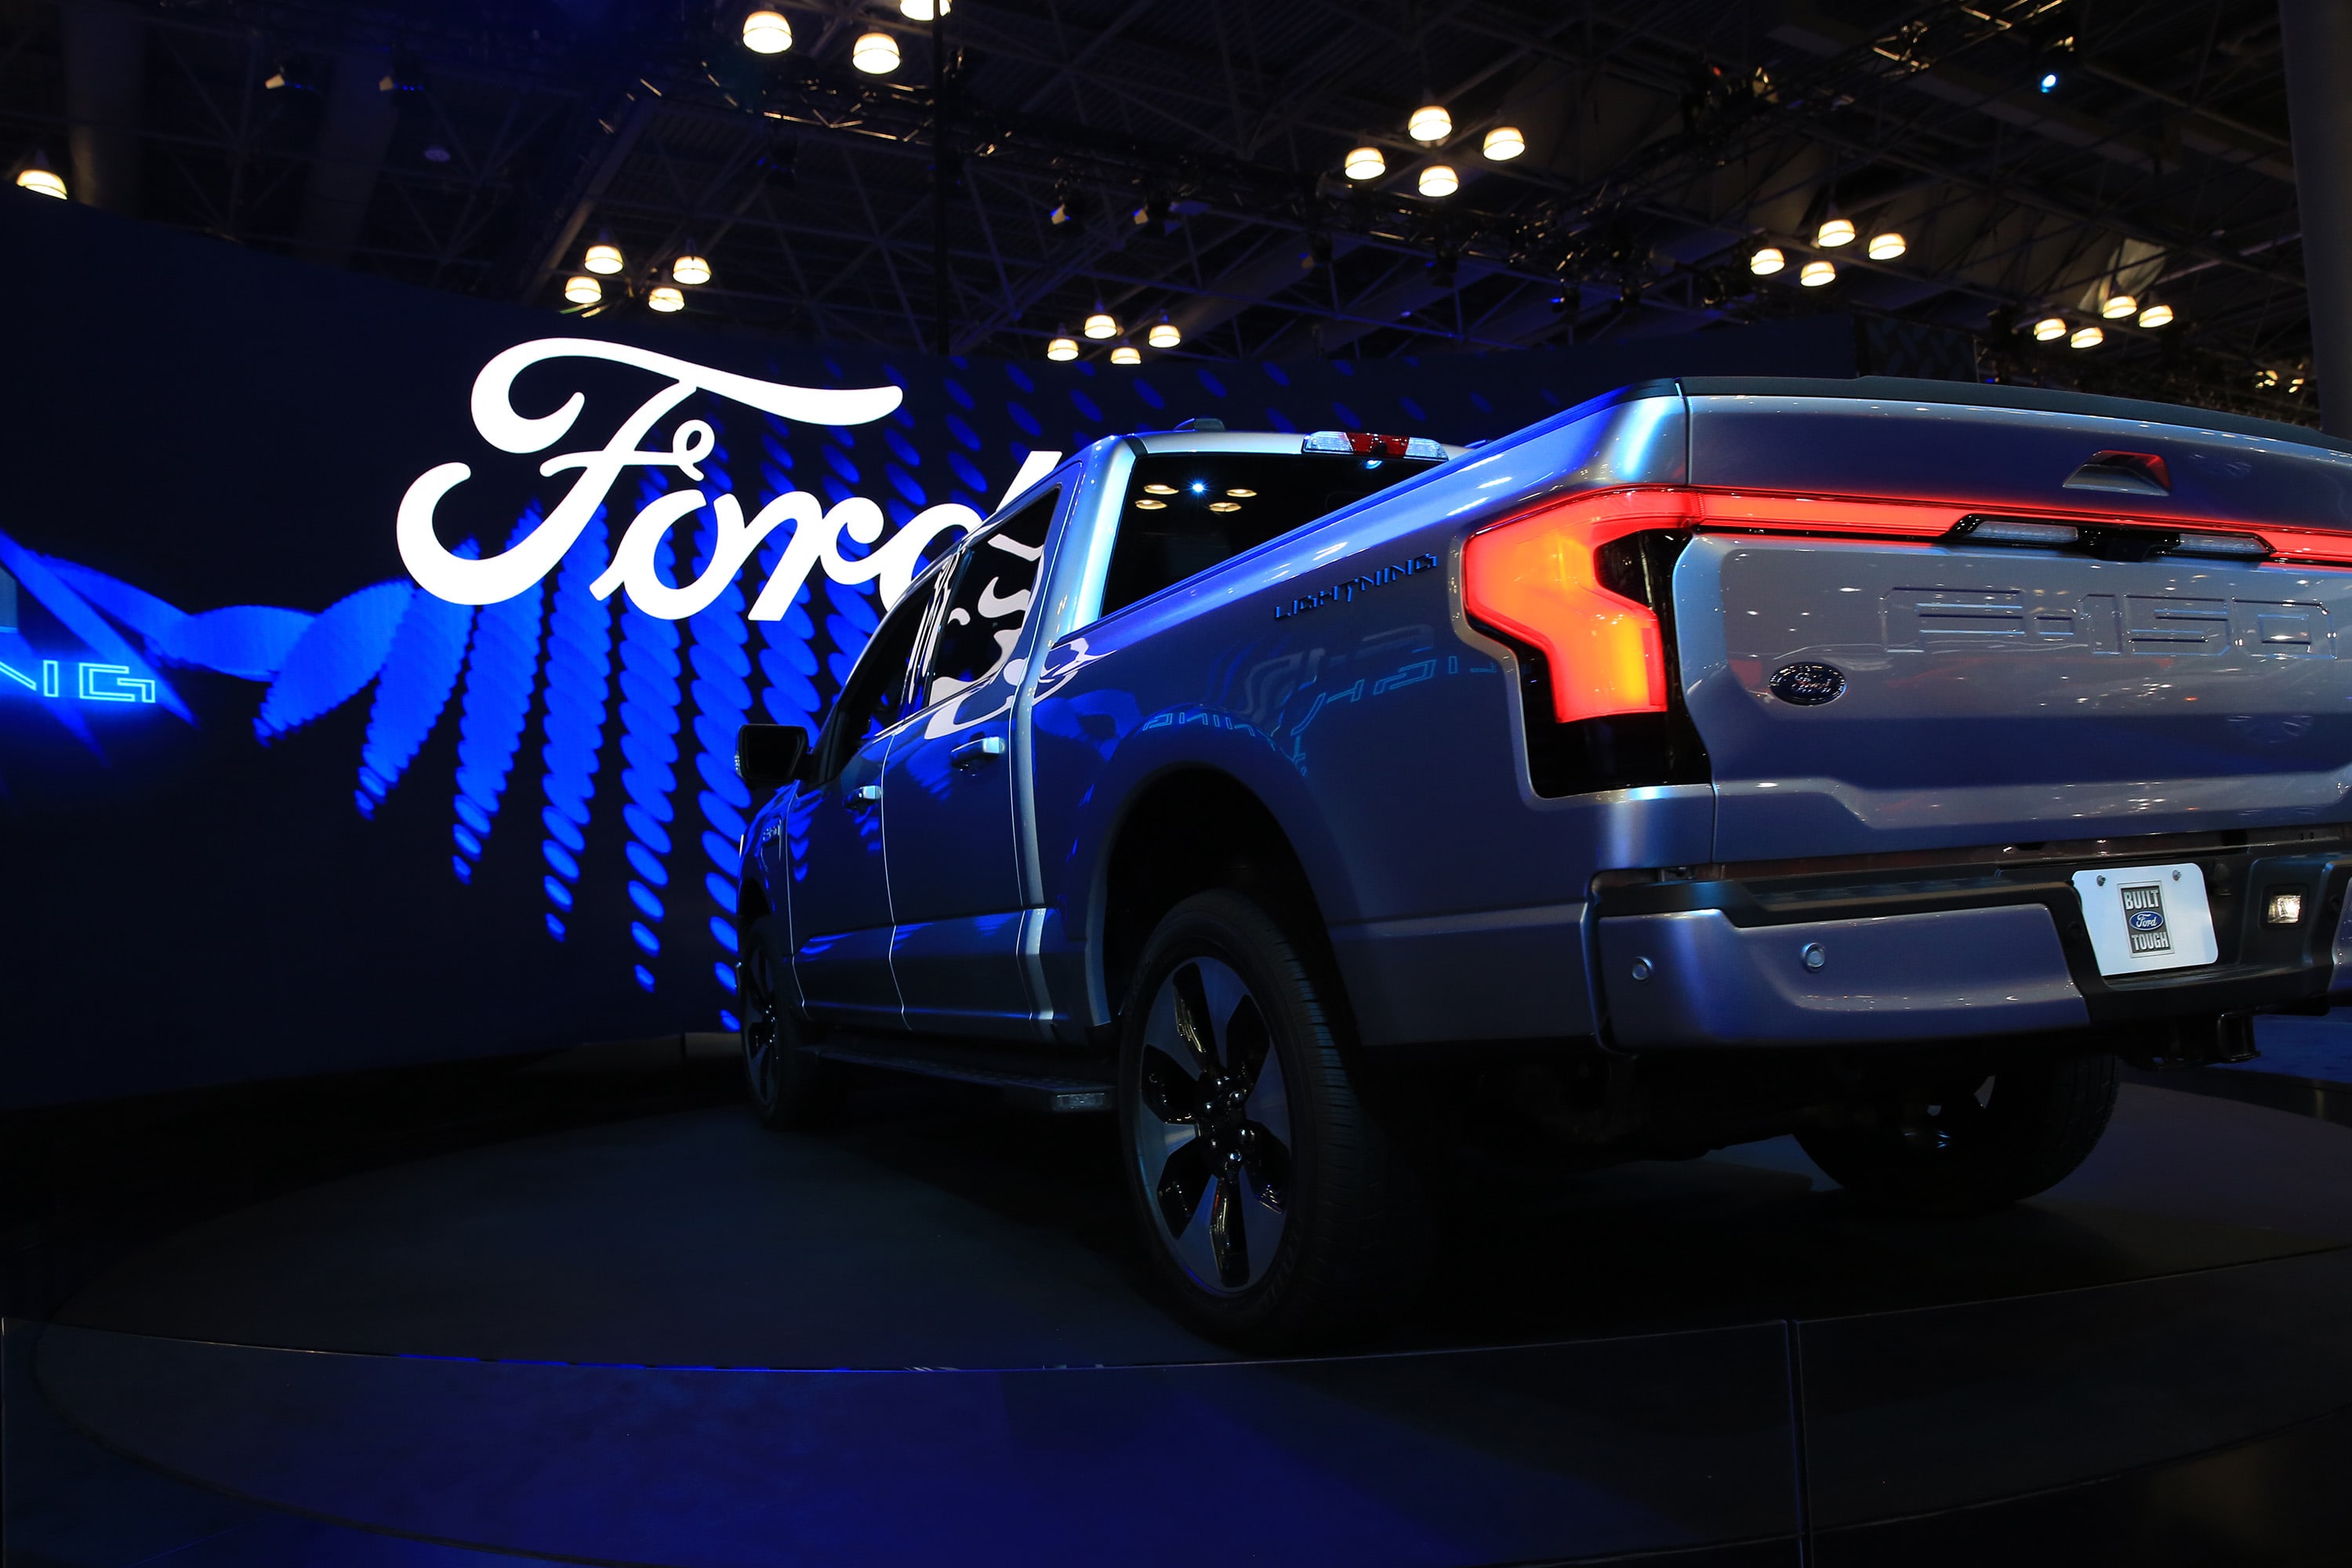 3 of our stocks, including Ford, are in the news. Here's the Club's take on the headlines